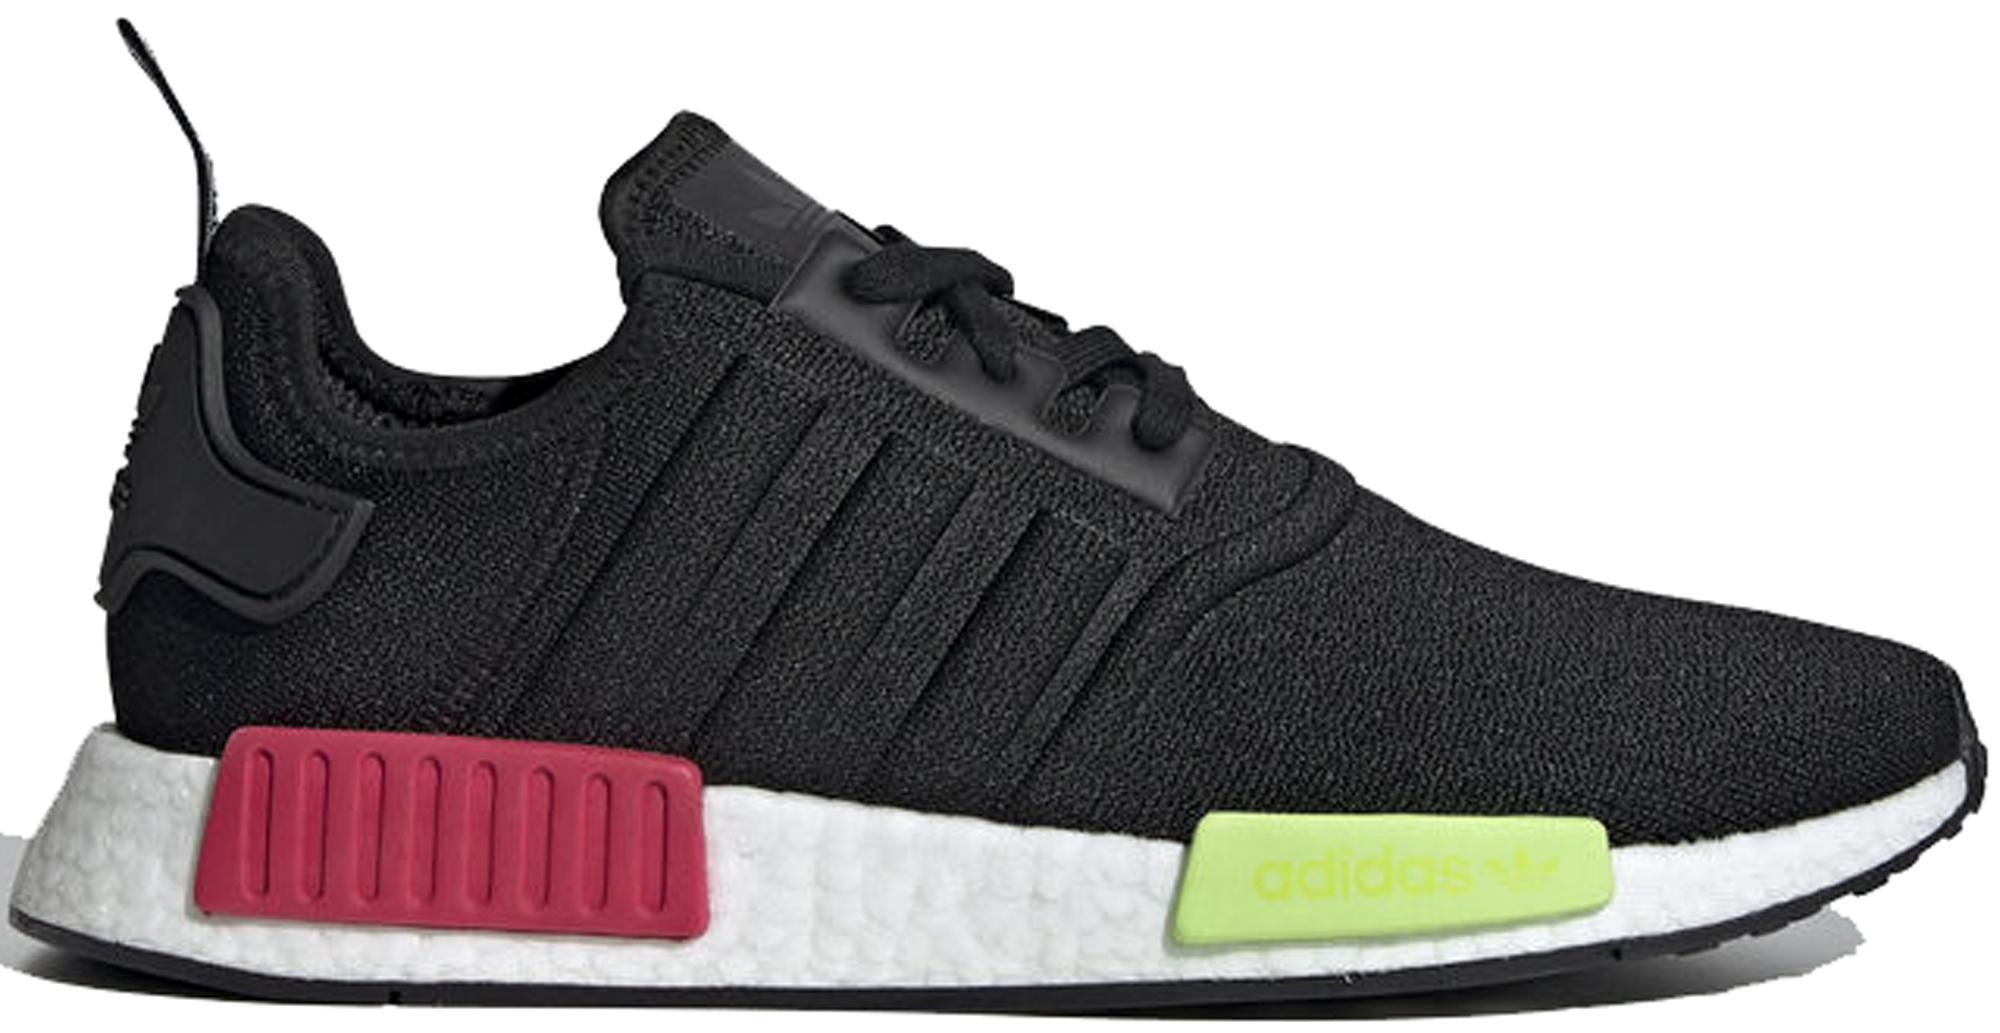 adidas Nmd R1 Core Black Energy Pink for Men - Lyst